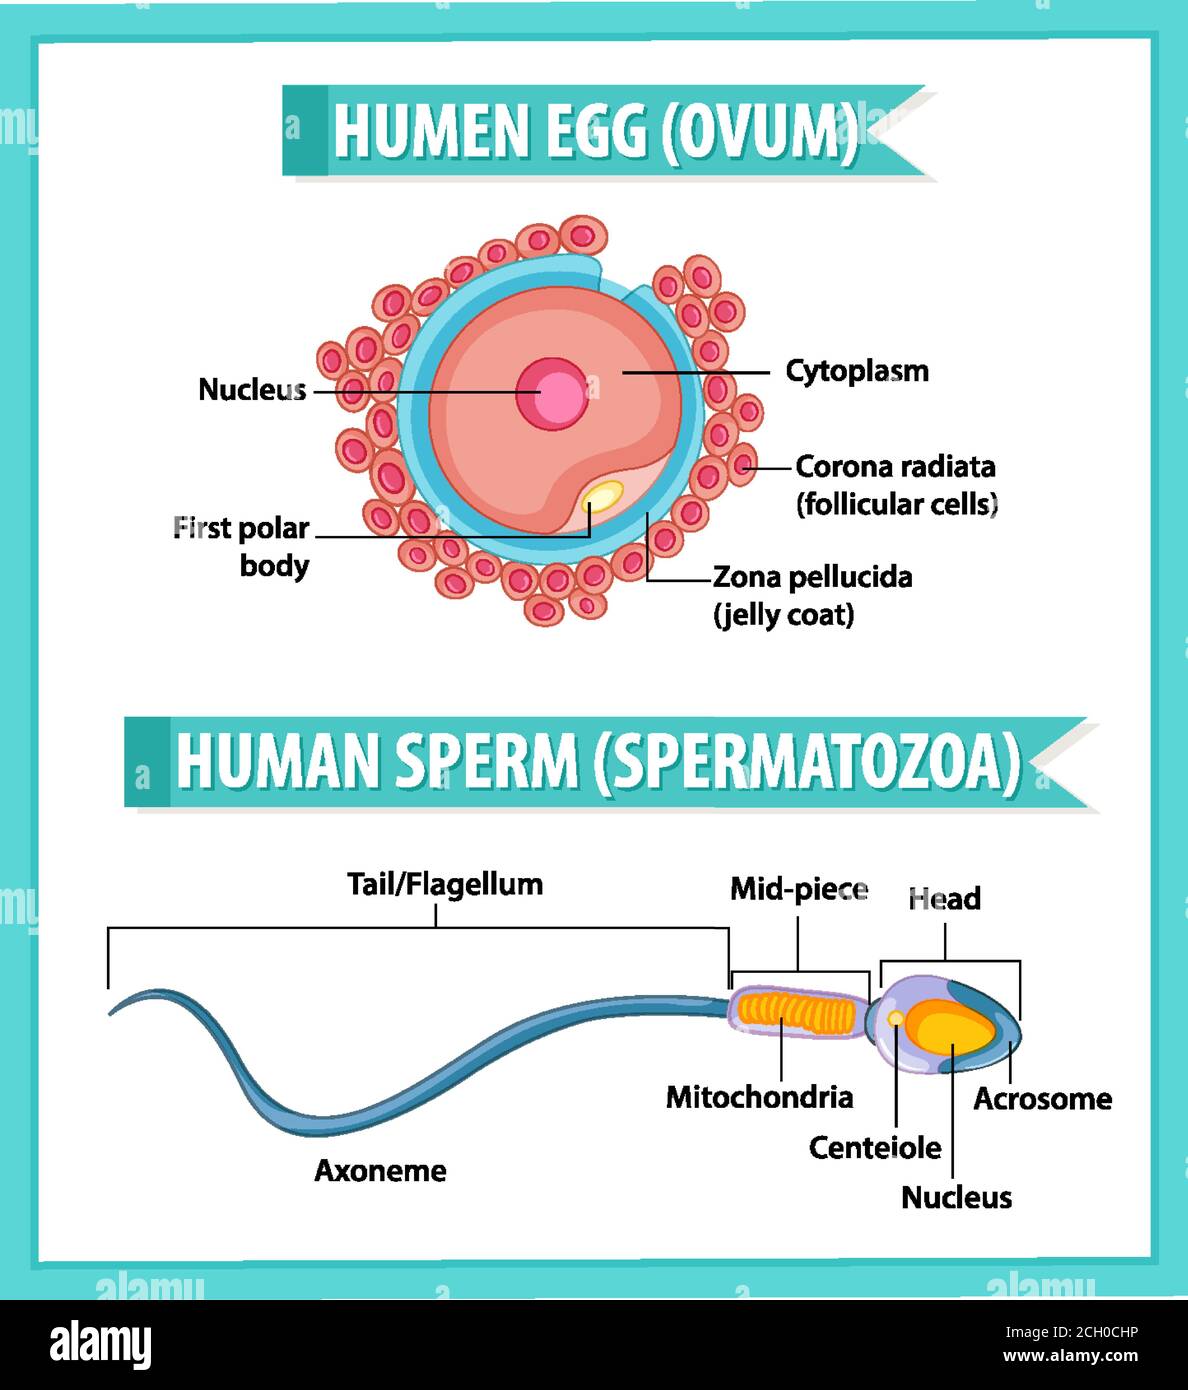 Human Egg or Ovum structure and Human Sperm or Spermatazoa for health education infographic illustration Stock Vector